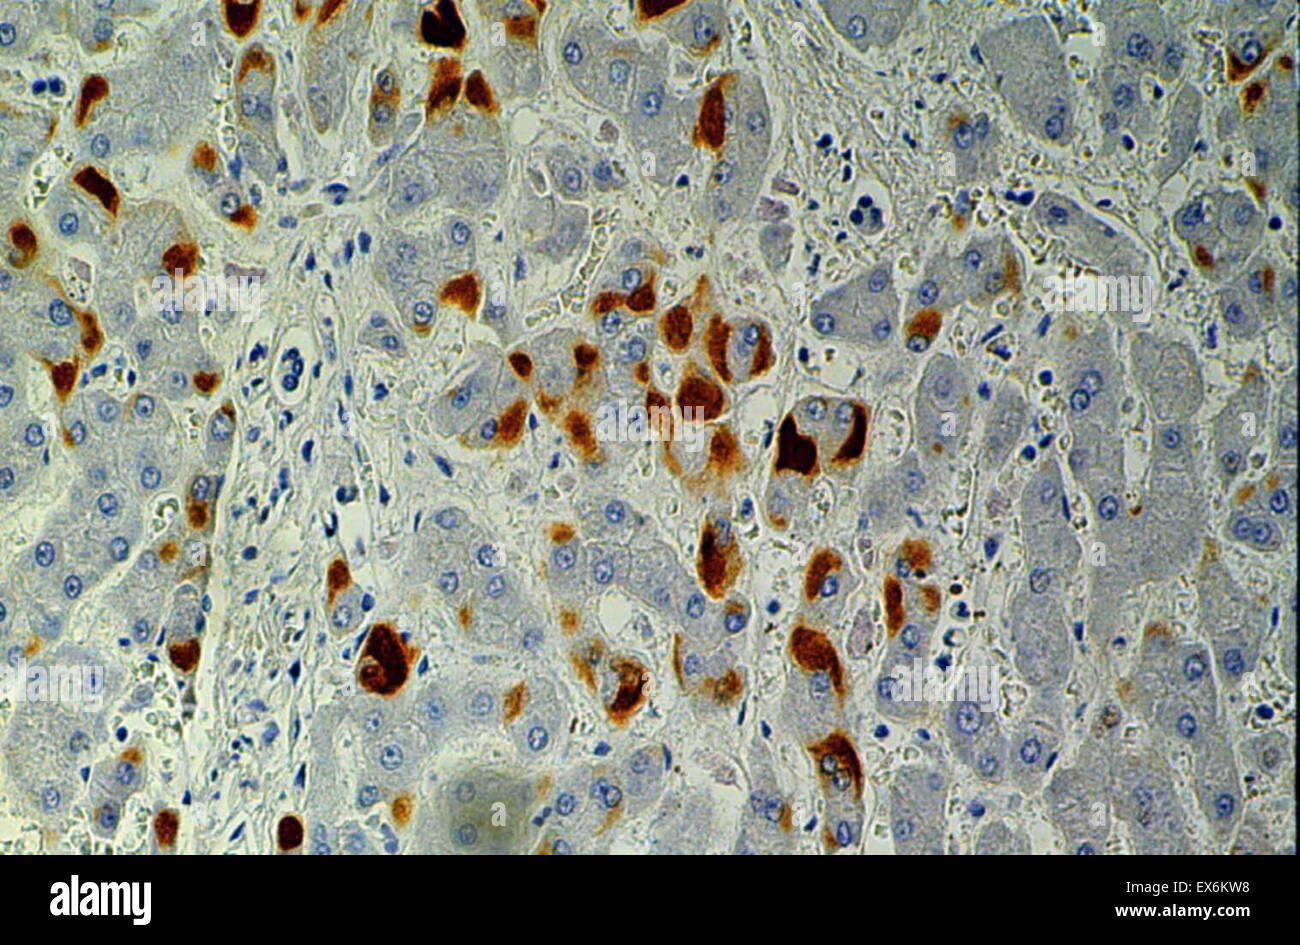 Hepatitis B Surface Antigen: Immunoperoxidase staining of formalin-fixed, paraffin-embedded, mouse liver showing cytoplasm staining of hepatocytes Stock Photo